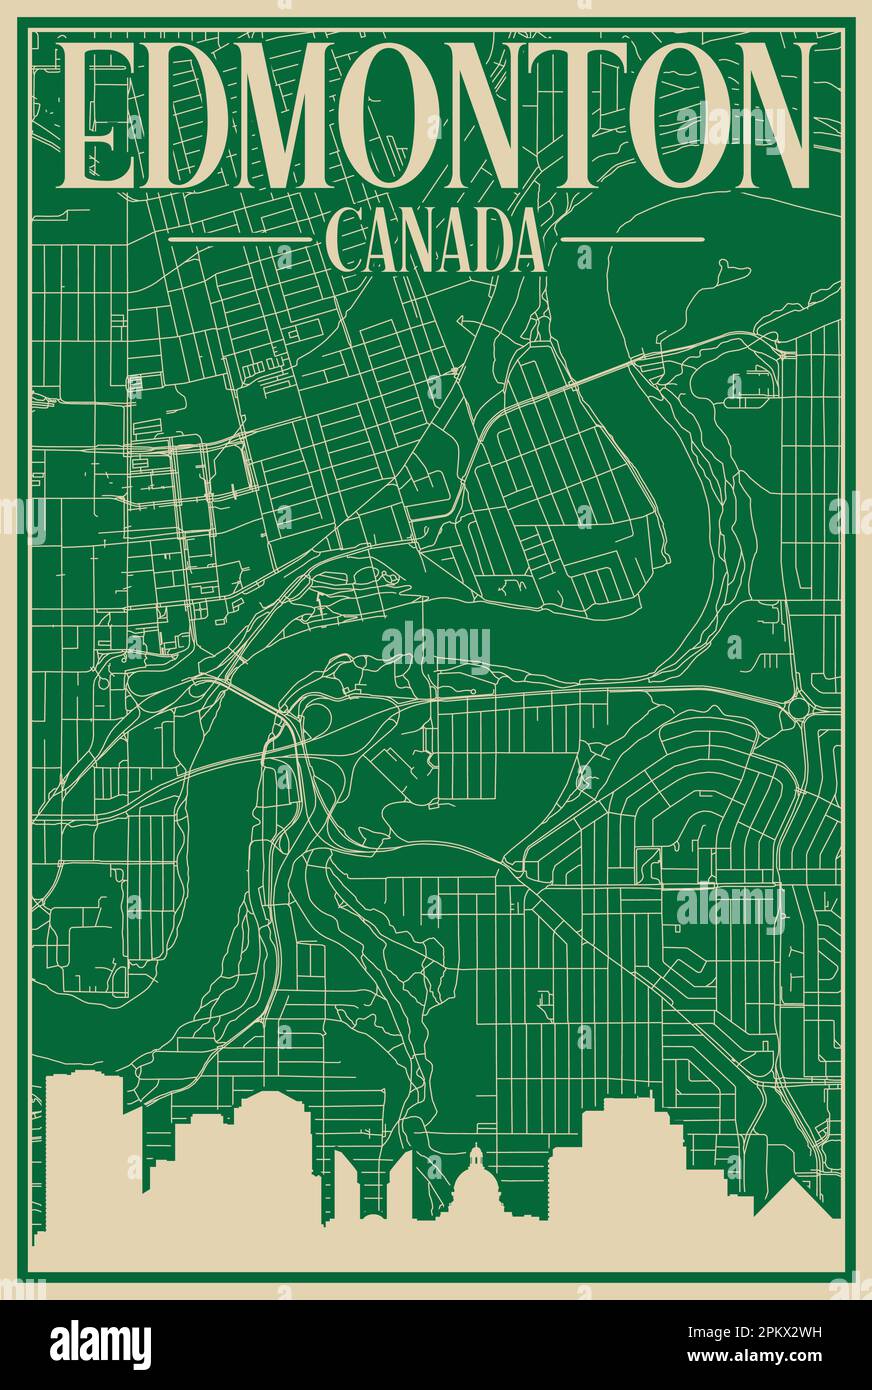 Road network poster of the downtown EDMONTON, CANADA Stock Vector